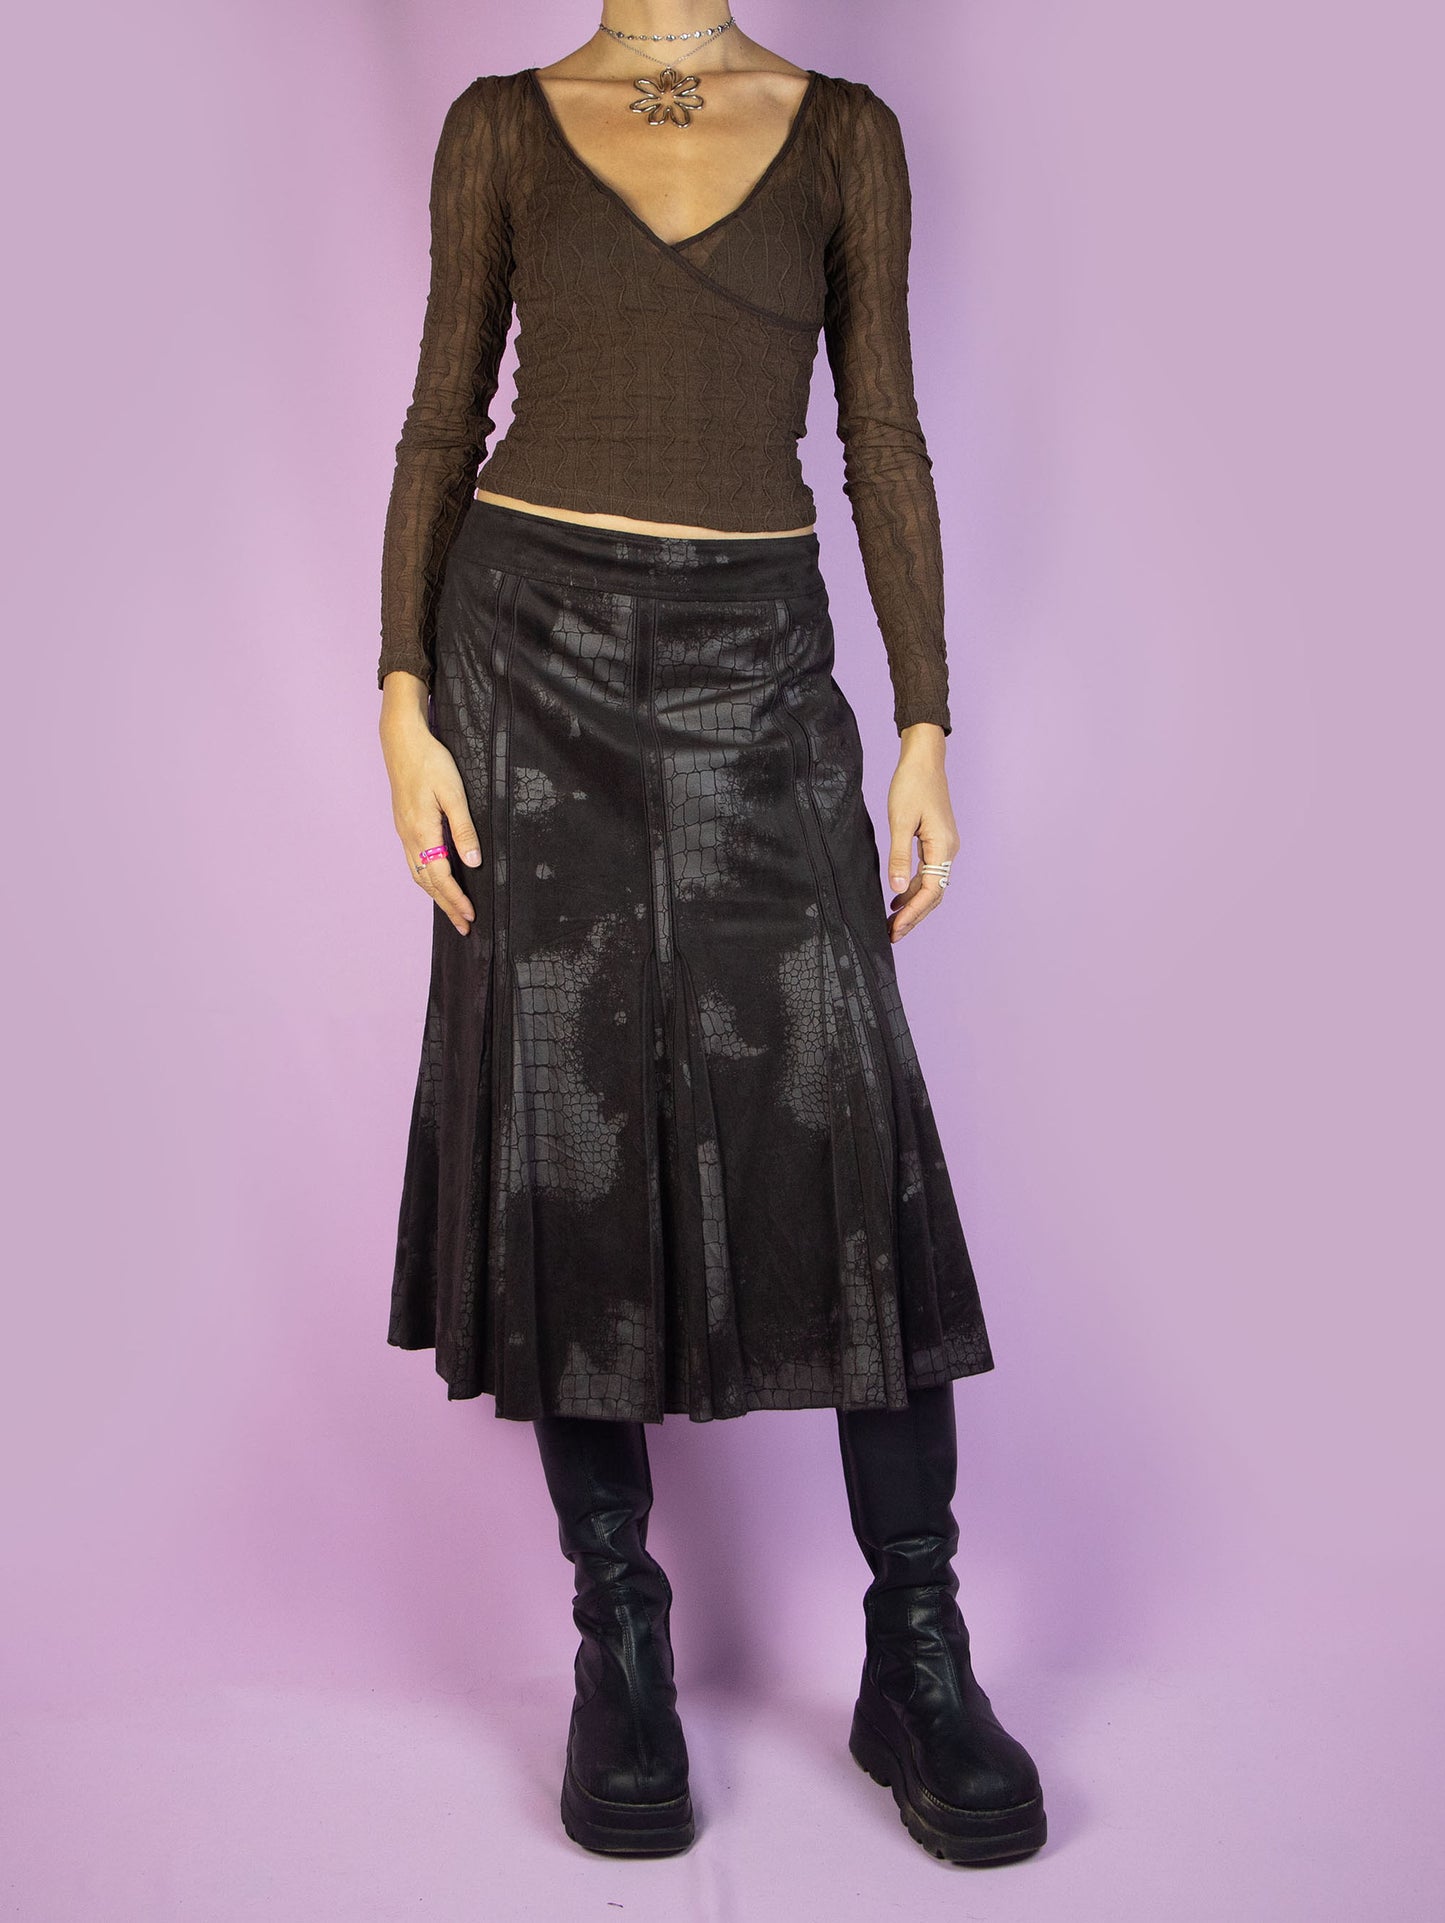 The Y2K Dark Brown Midi Skirt is a vintage flared faux suede skirt with animal pattern details and a side zipper closure. Gorgeous fairy grunge whimsygoth style 2000s boho skirt. 